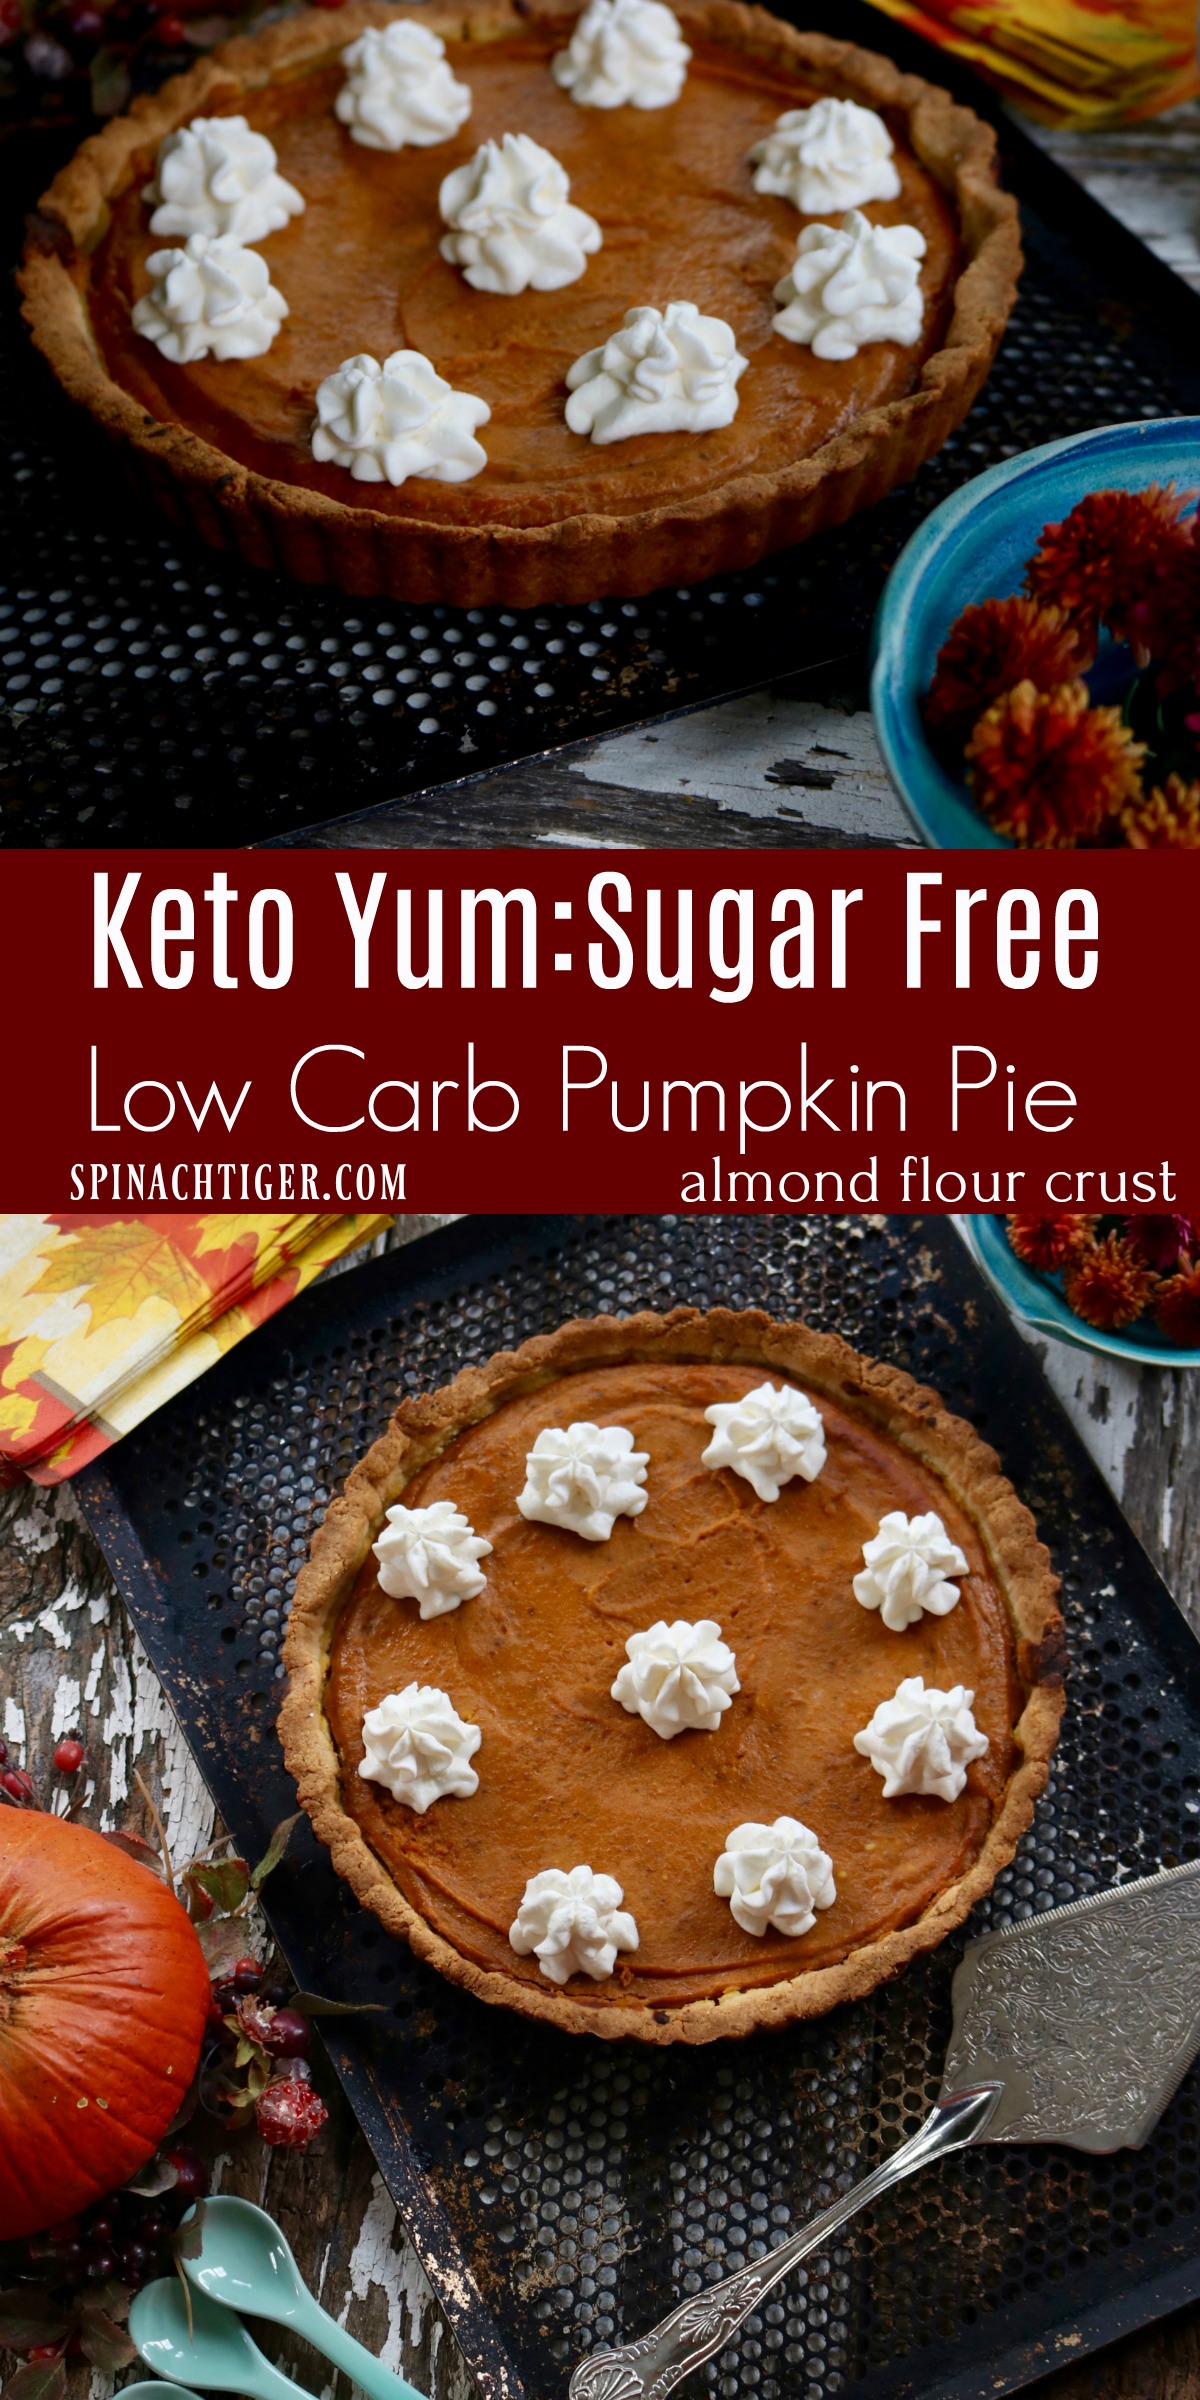 Low Carb Pumpkin Pie from Spinach Tiger